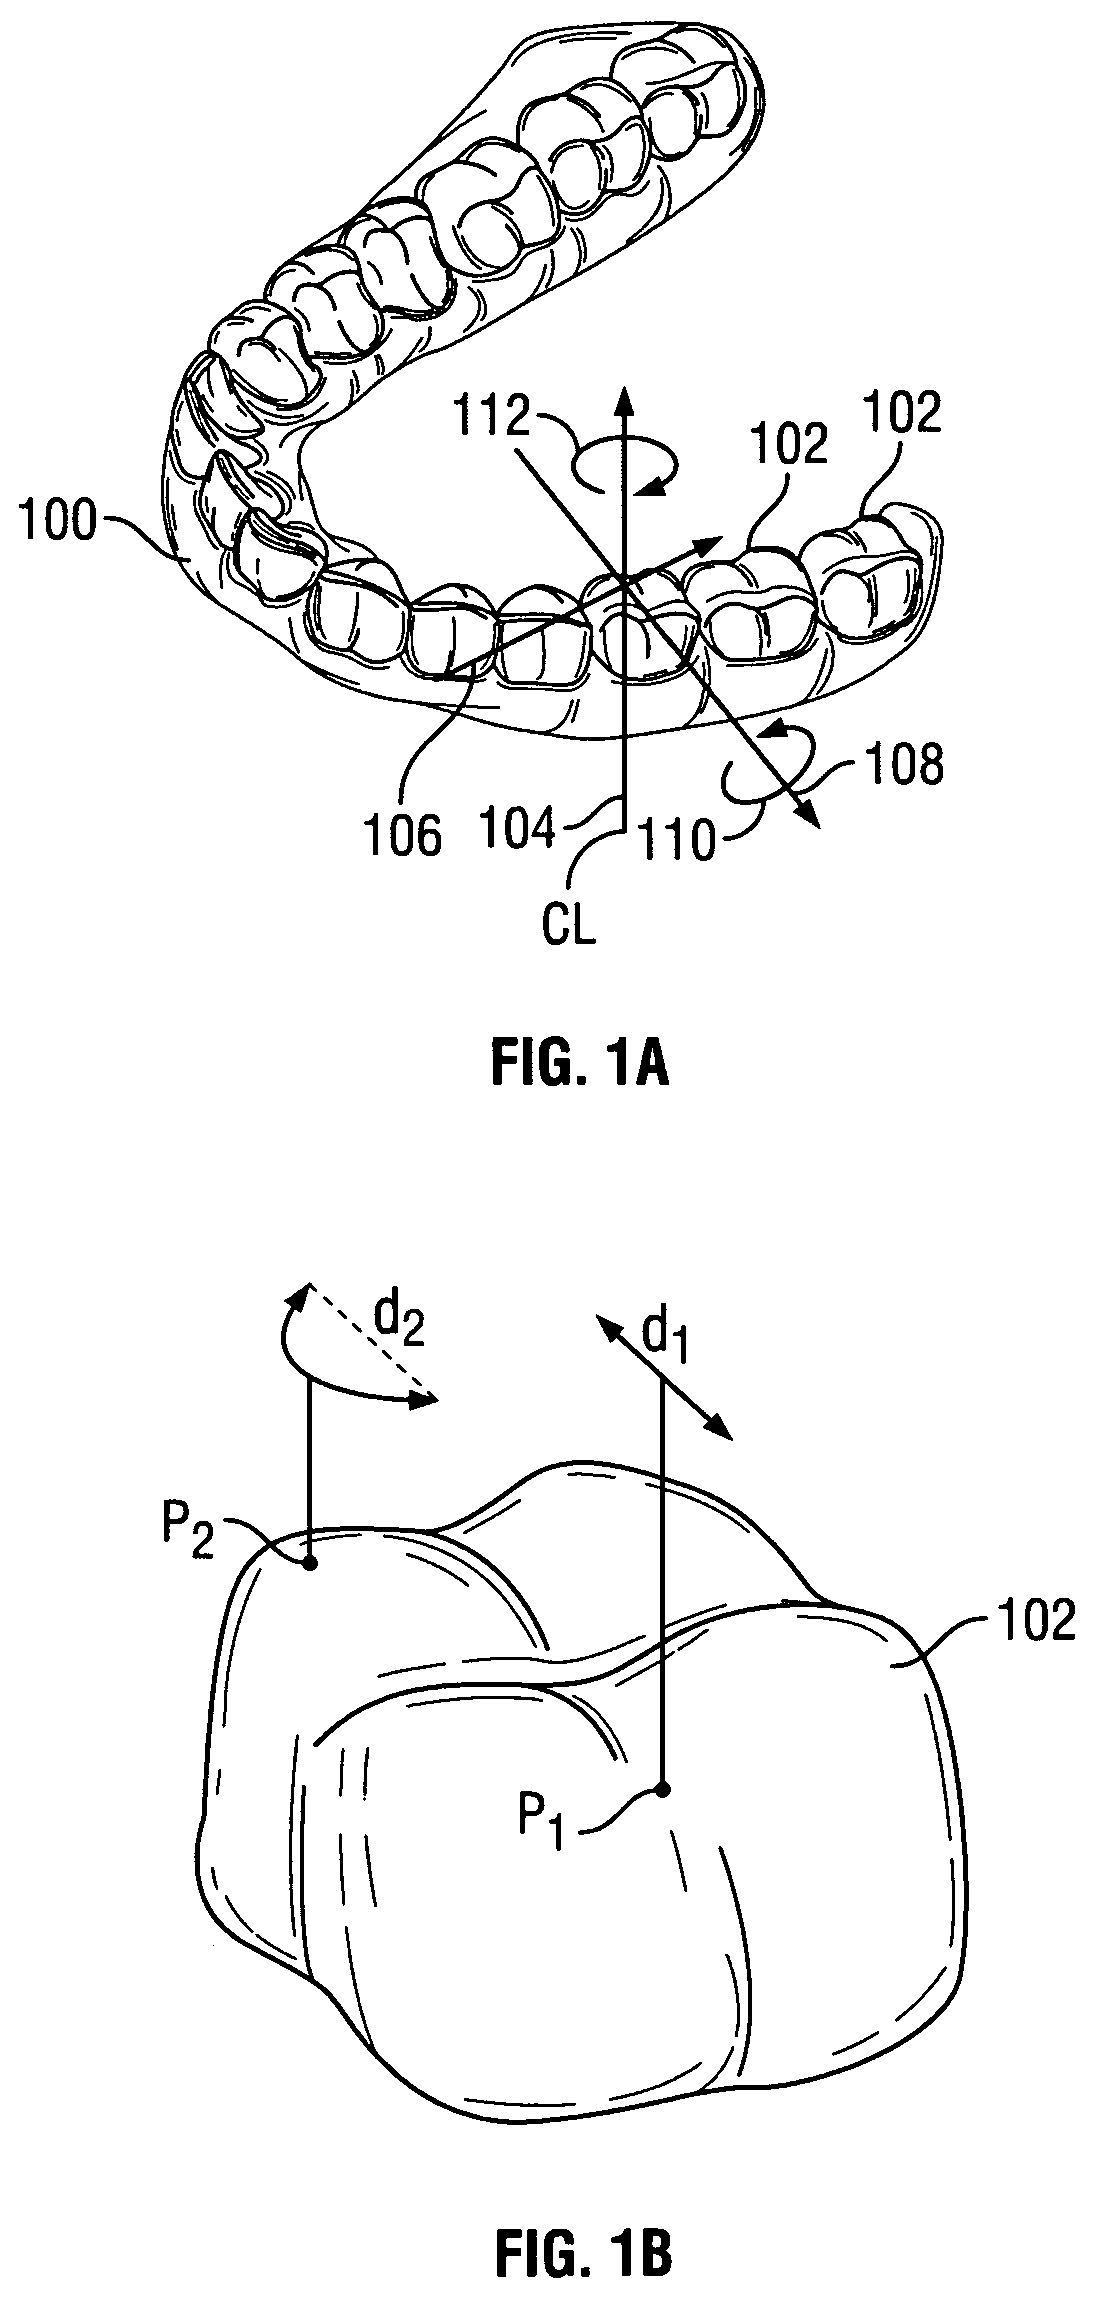 Guide apparatus and methods for making tooth positioning appliances